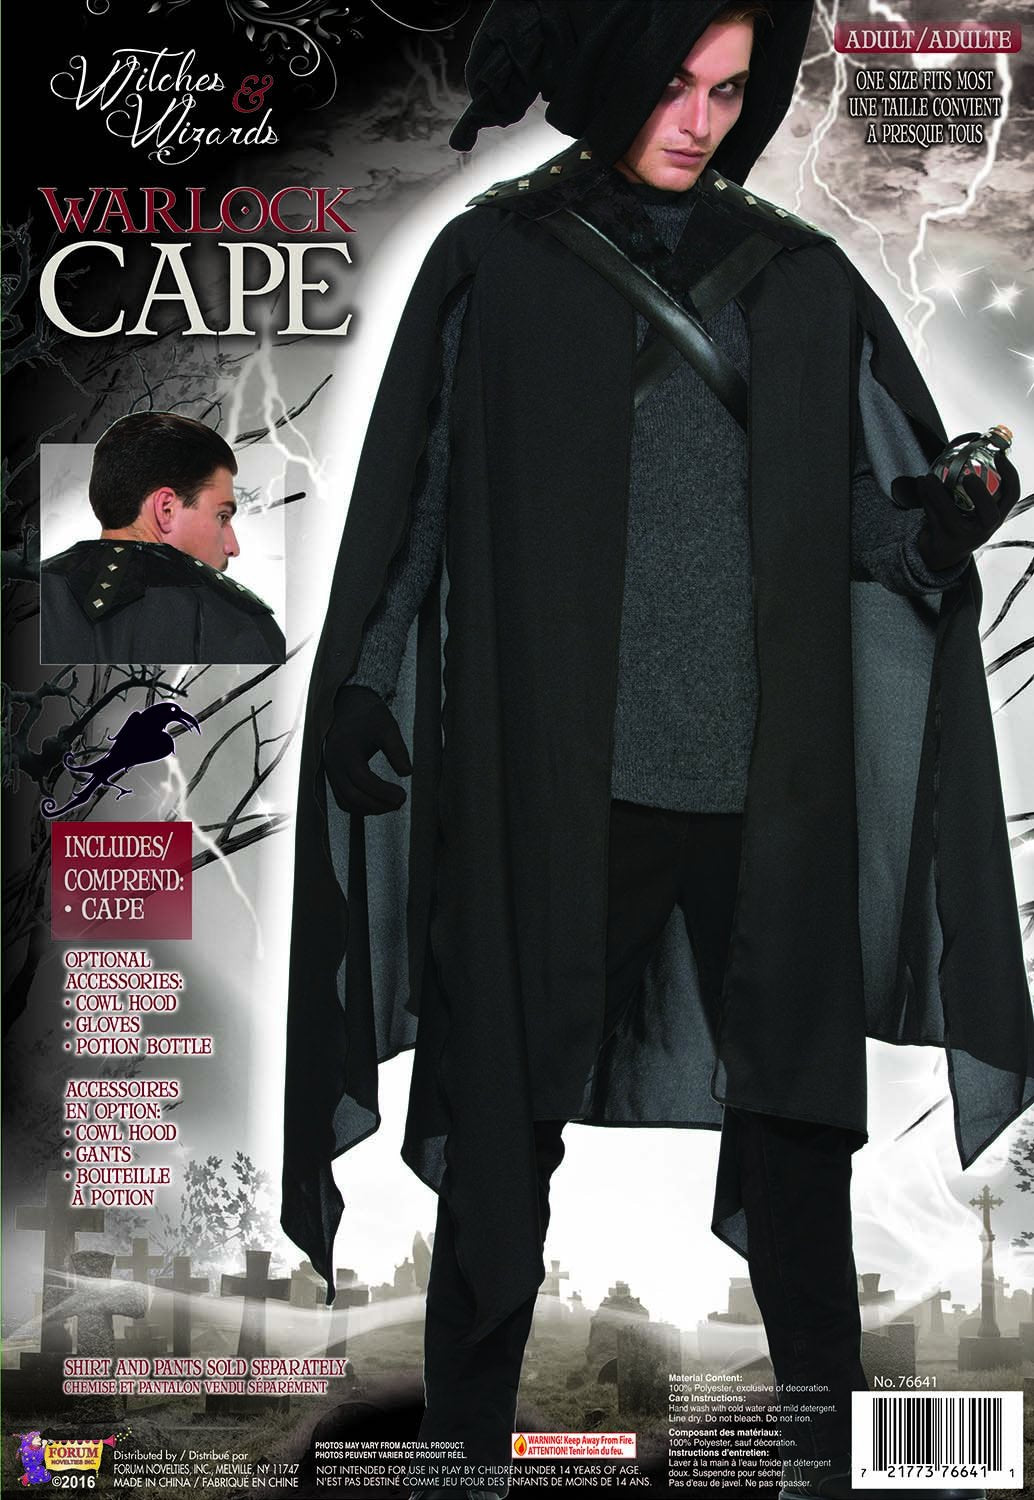 Black cape with studs on collar